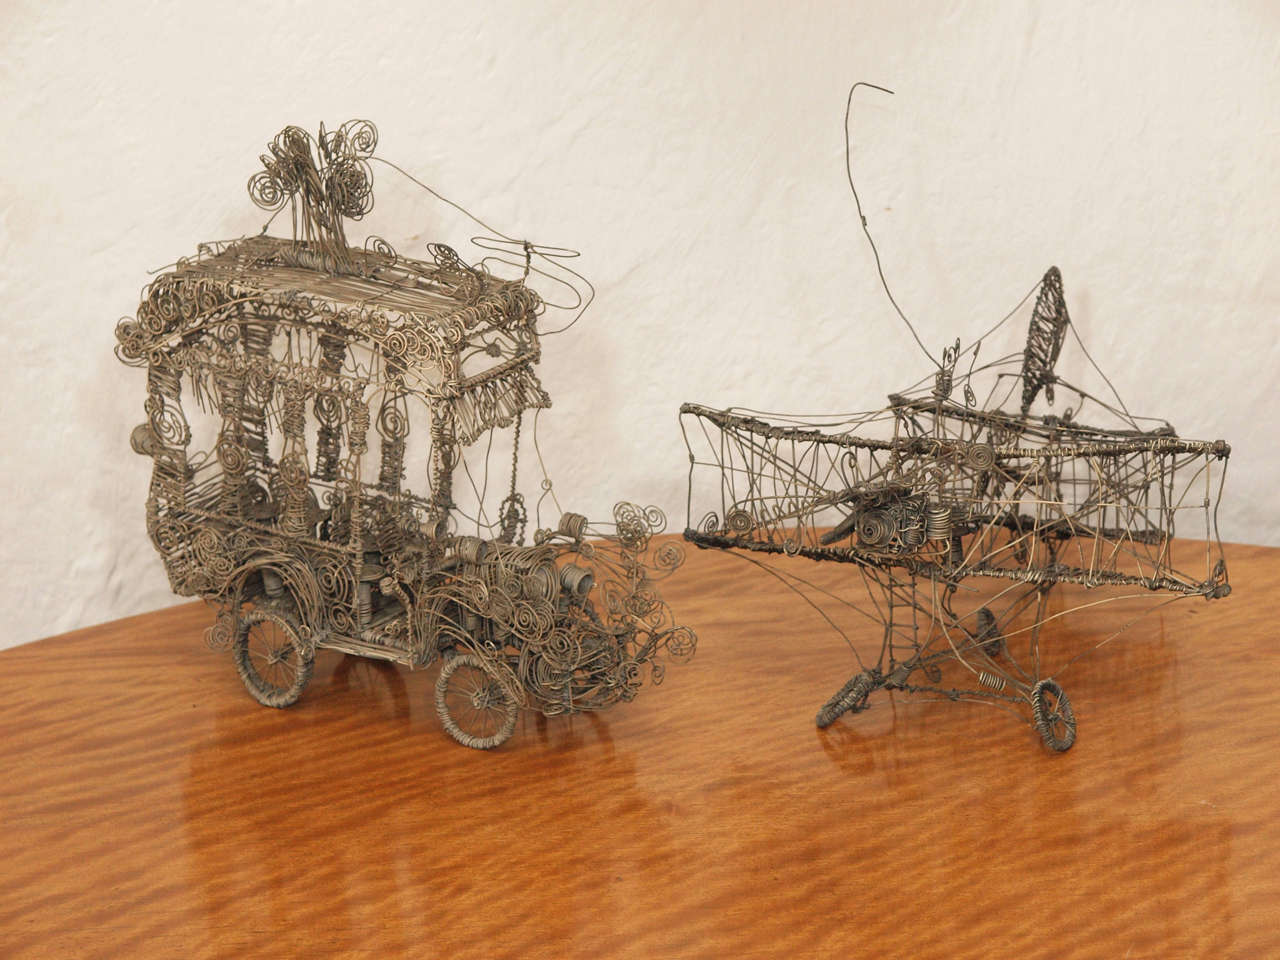 Unique and fanciful pair of wire sculptures, one in the shape of an autobus and the other in the shape of an airplane.